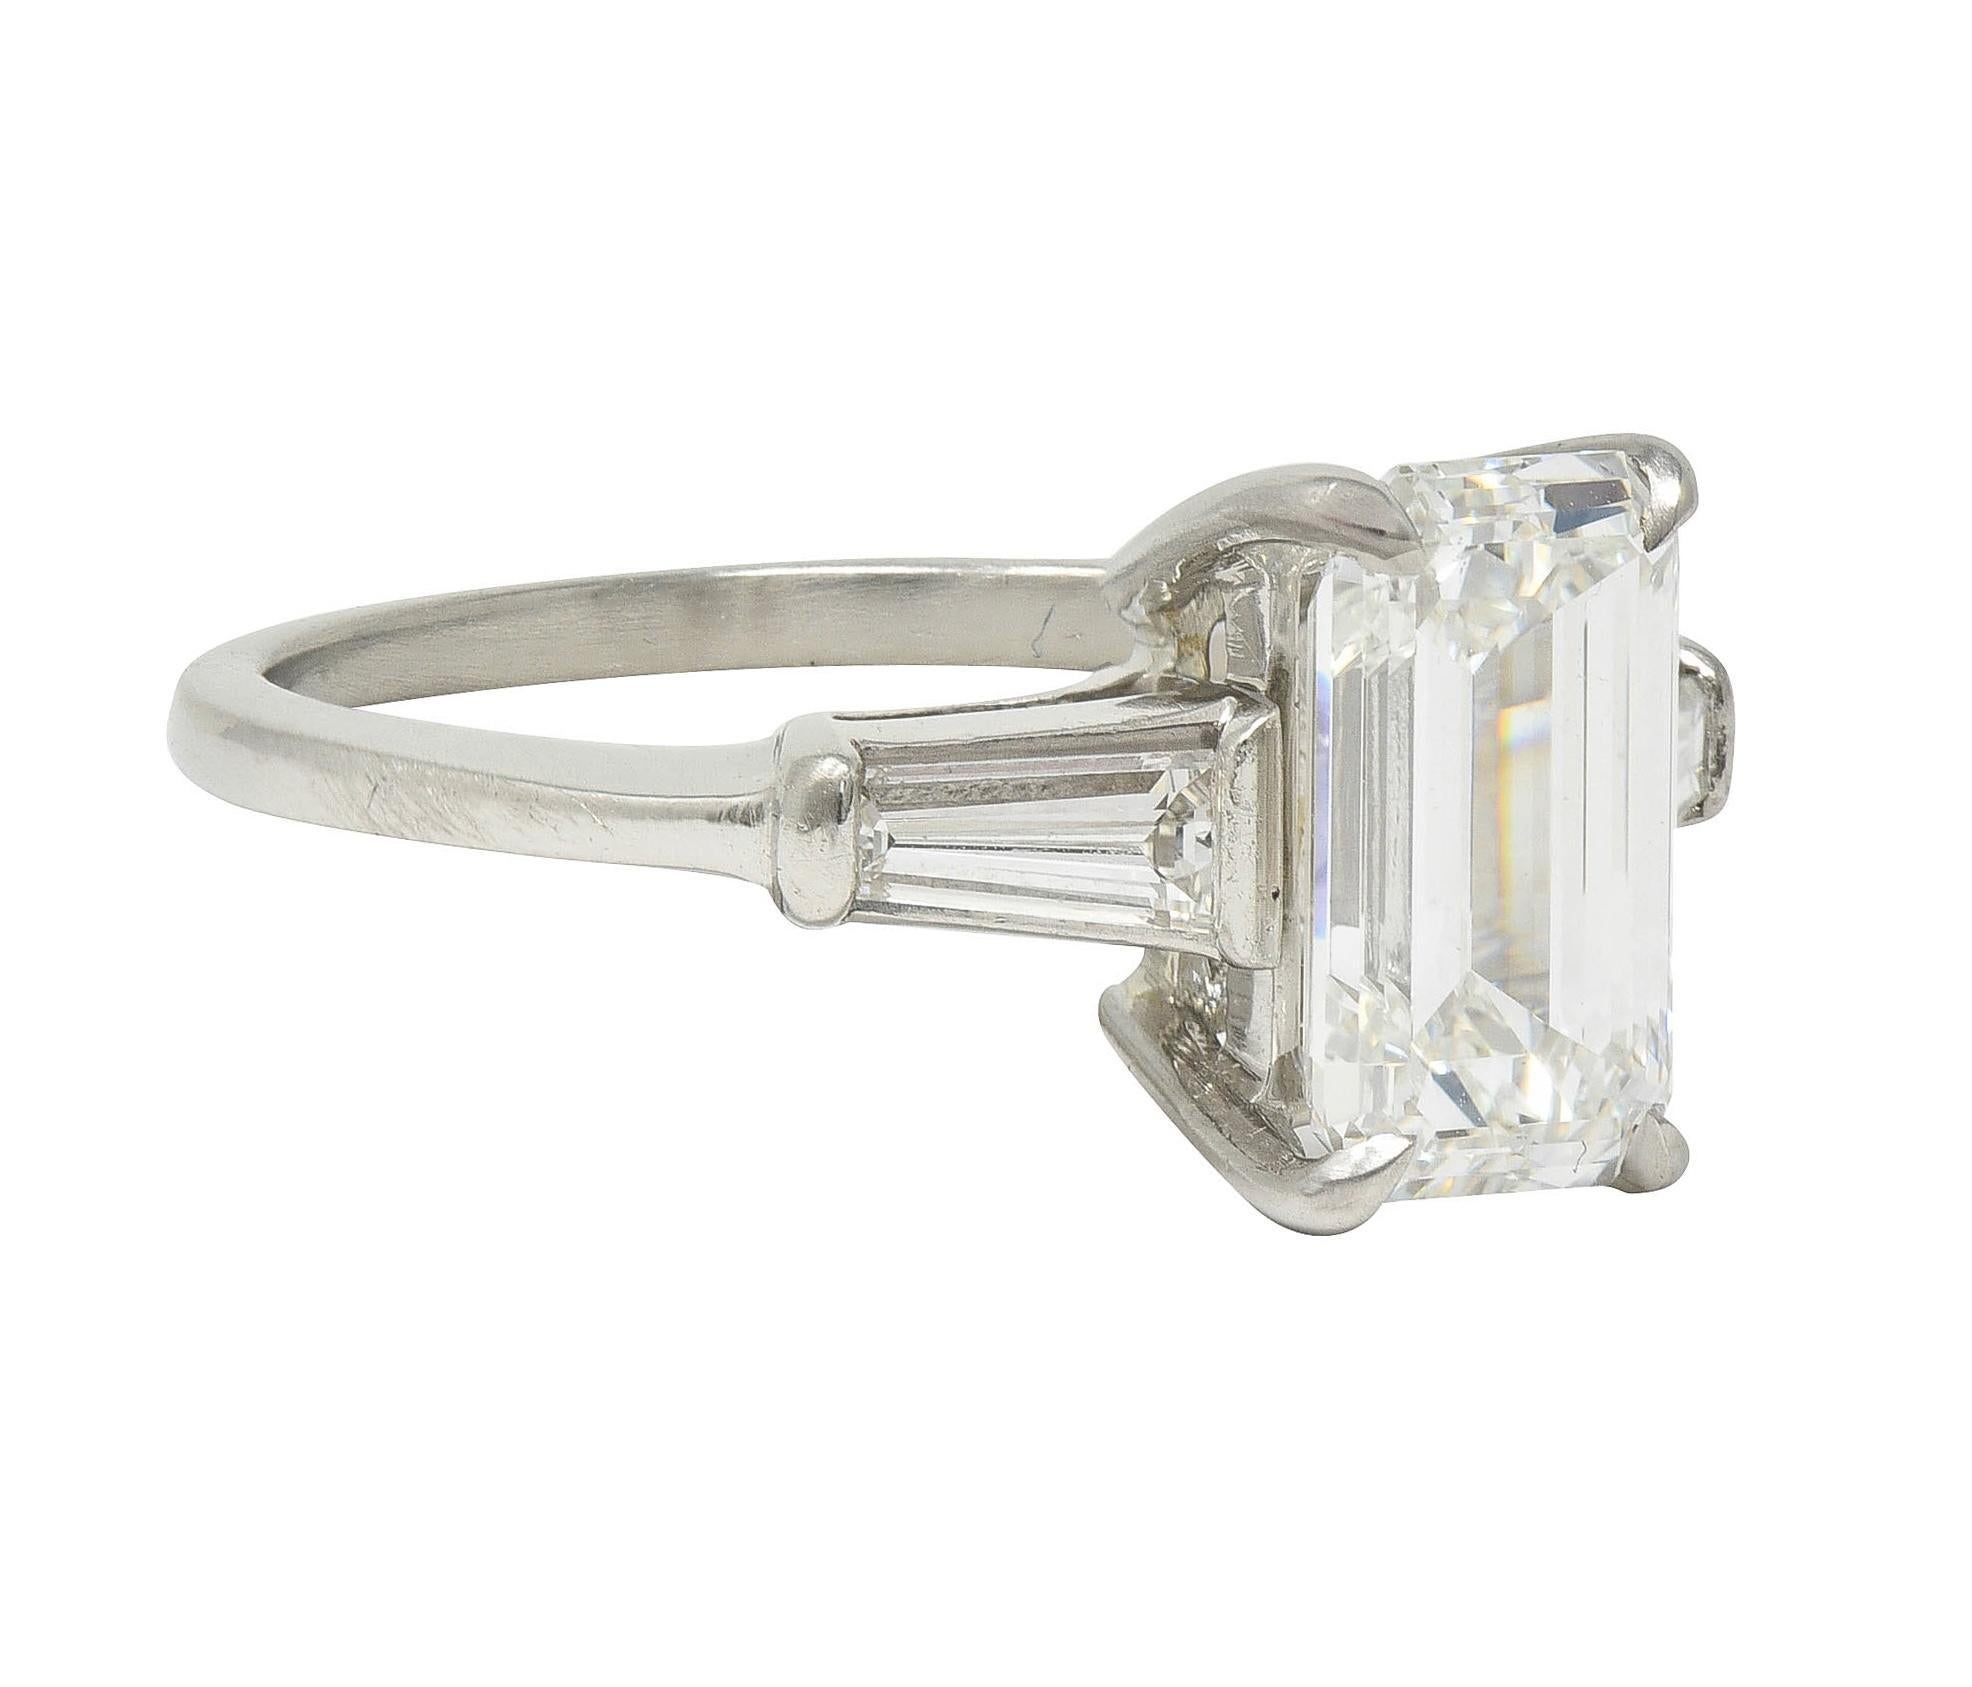 Centering an emerald cut diamond weighing 2.20 carats - H color with VS1 clarity
Prong set in basket and flanked by tapered baguette cut diamonds
Weighing approximately 0.36 carat total - well matched to center
Bar set in cathedral shoulders